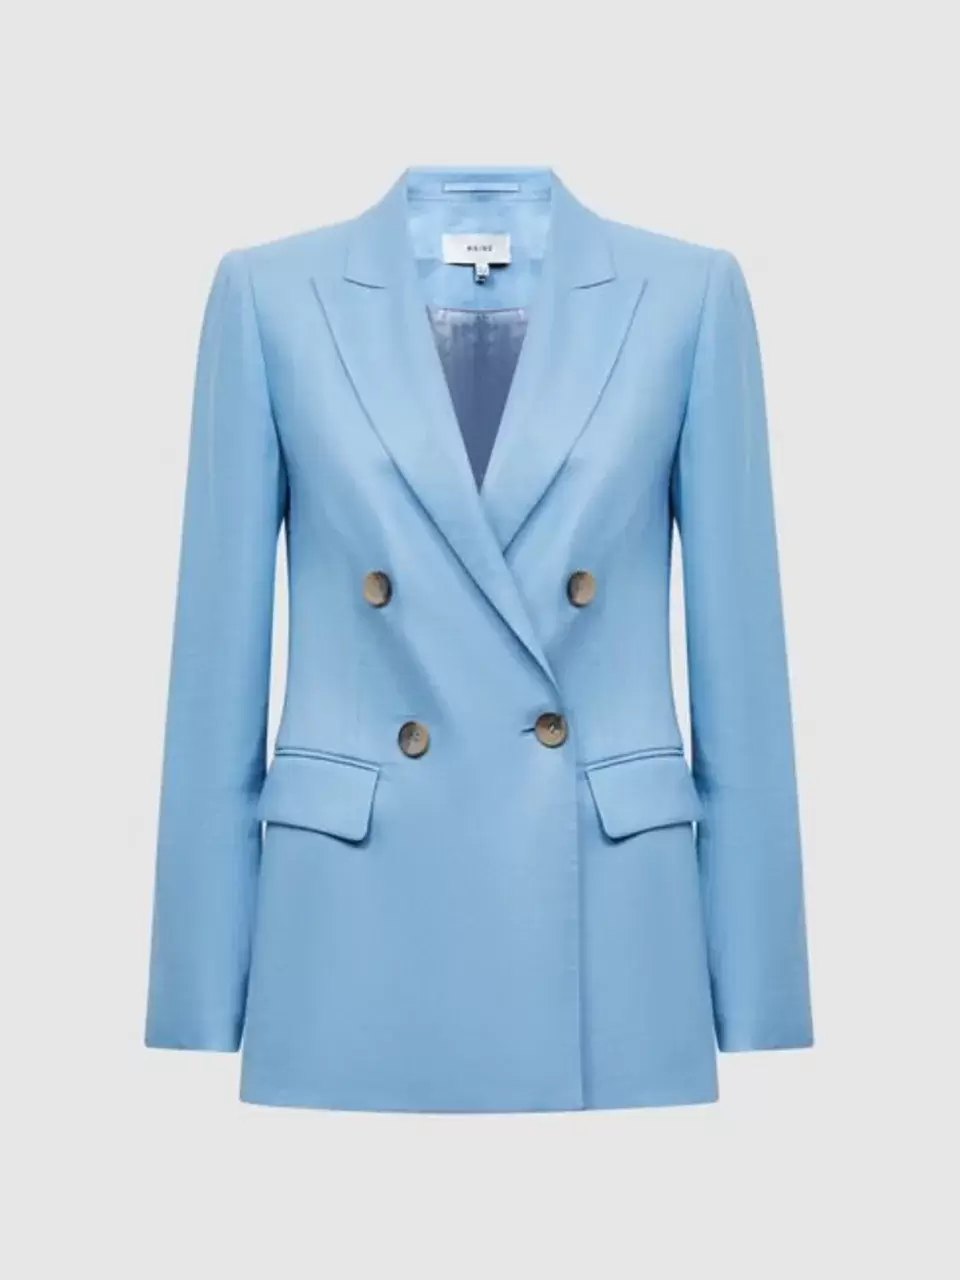 Reiss 'Hollie' Double-Breasted Linen Blazer in Blue